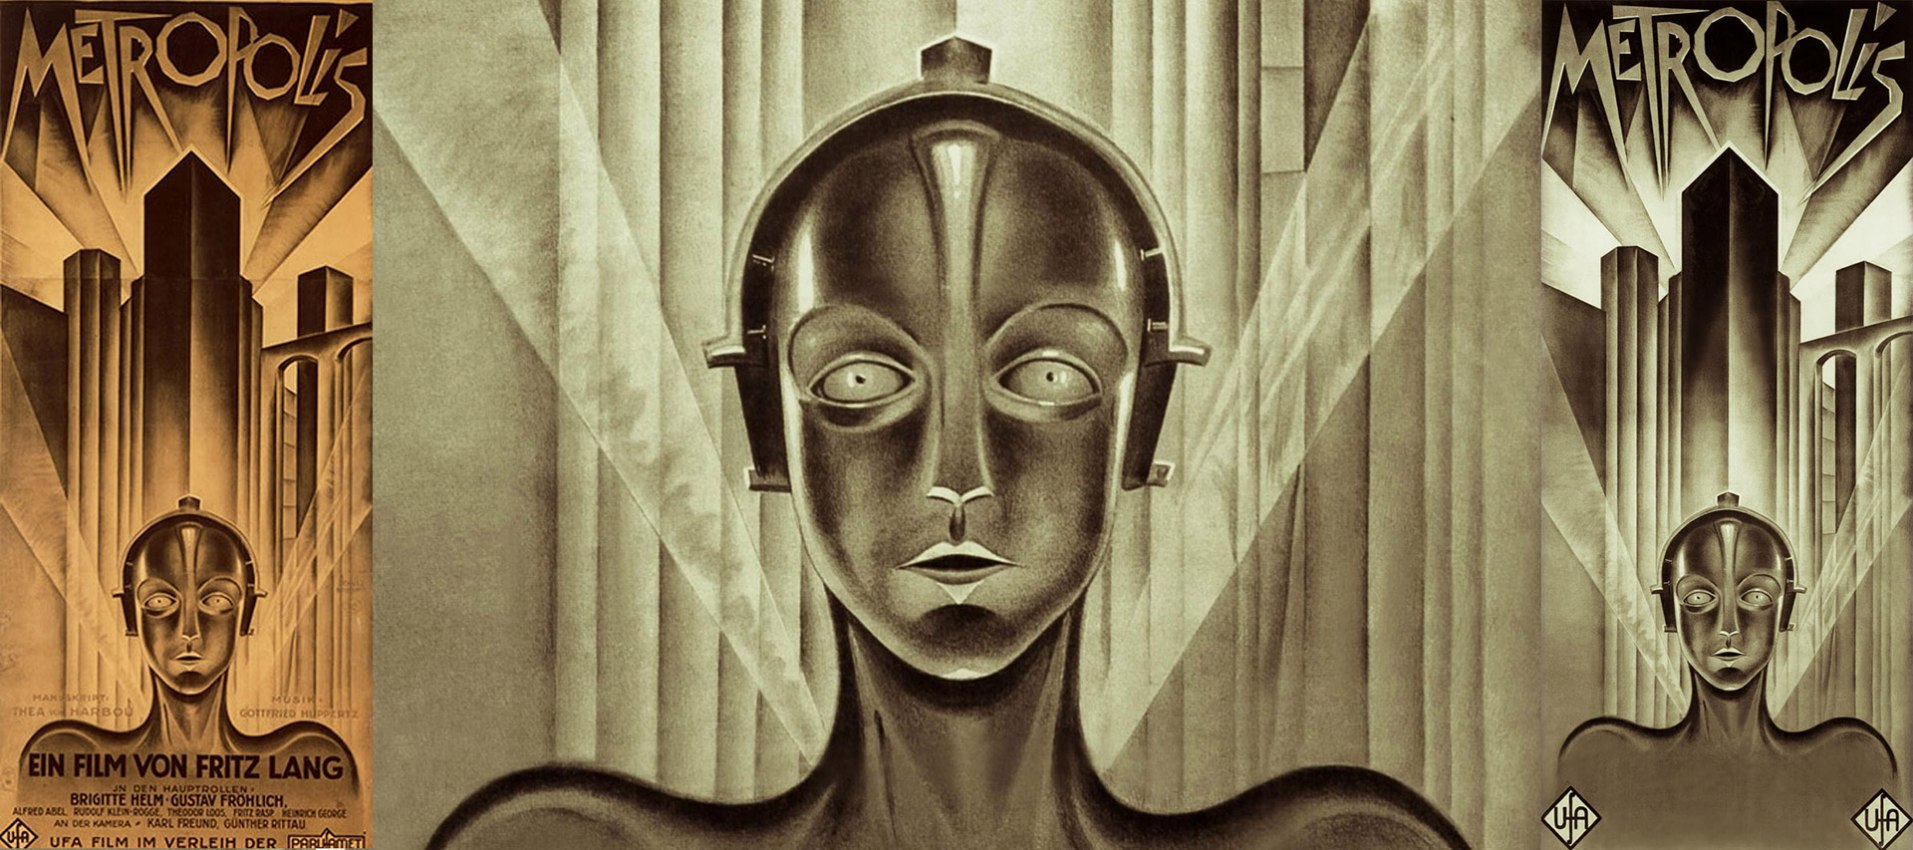 Metropolis, the most expensive movie poster | The Strength of Architecture  | From 1998